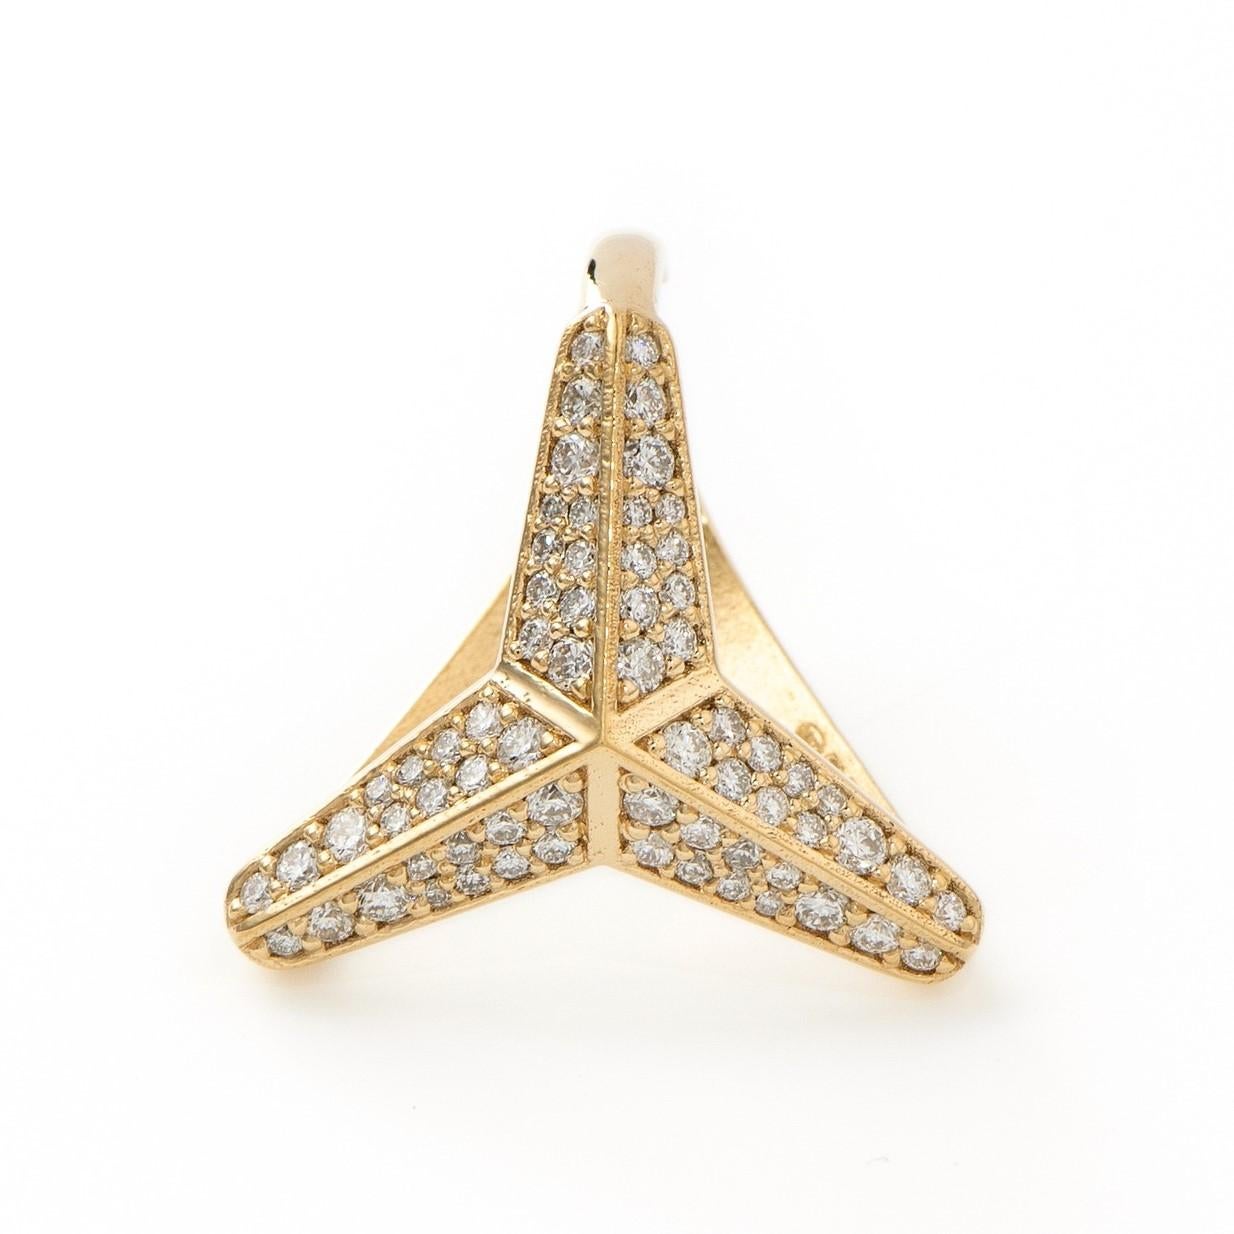 The Three pointed star, large diamond ear cuff is crafted in 18K yellow gold hallmarked in Cyprus. This stunning diamond ear cuff, comes in a highly polished finish and features natural white Diamonds totalling 0,53 Cts. Classy and easy to wear, It